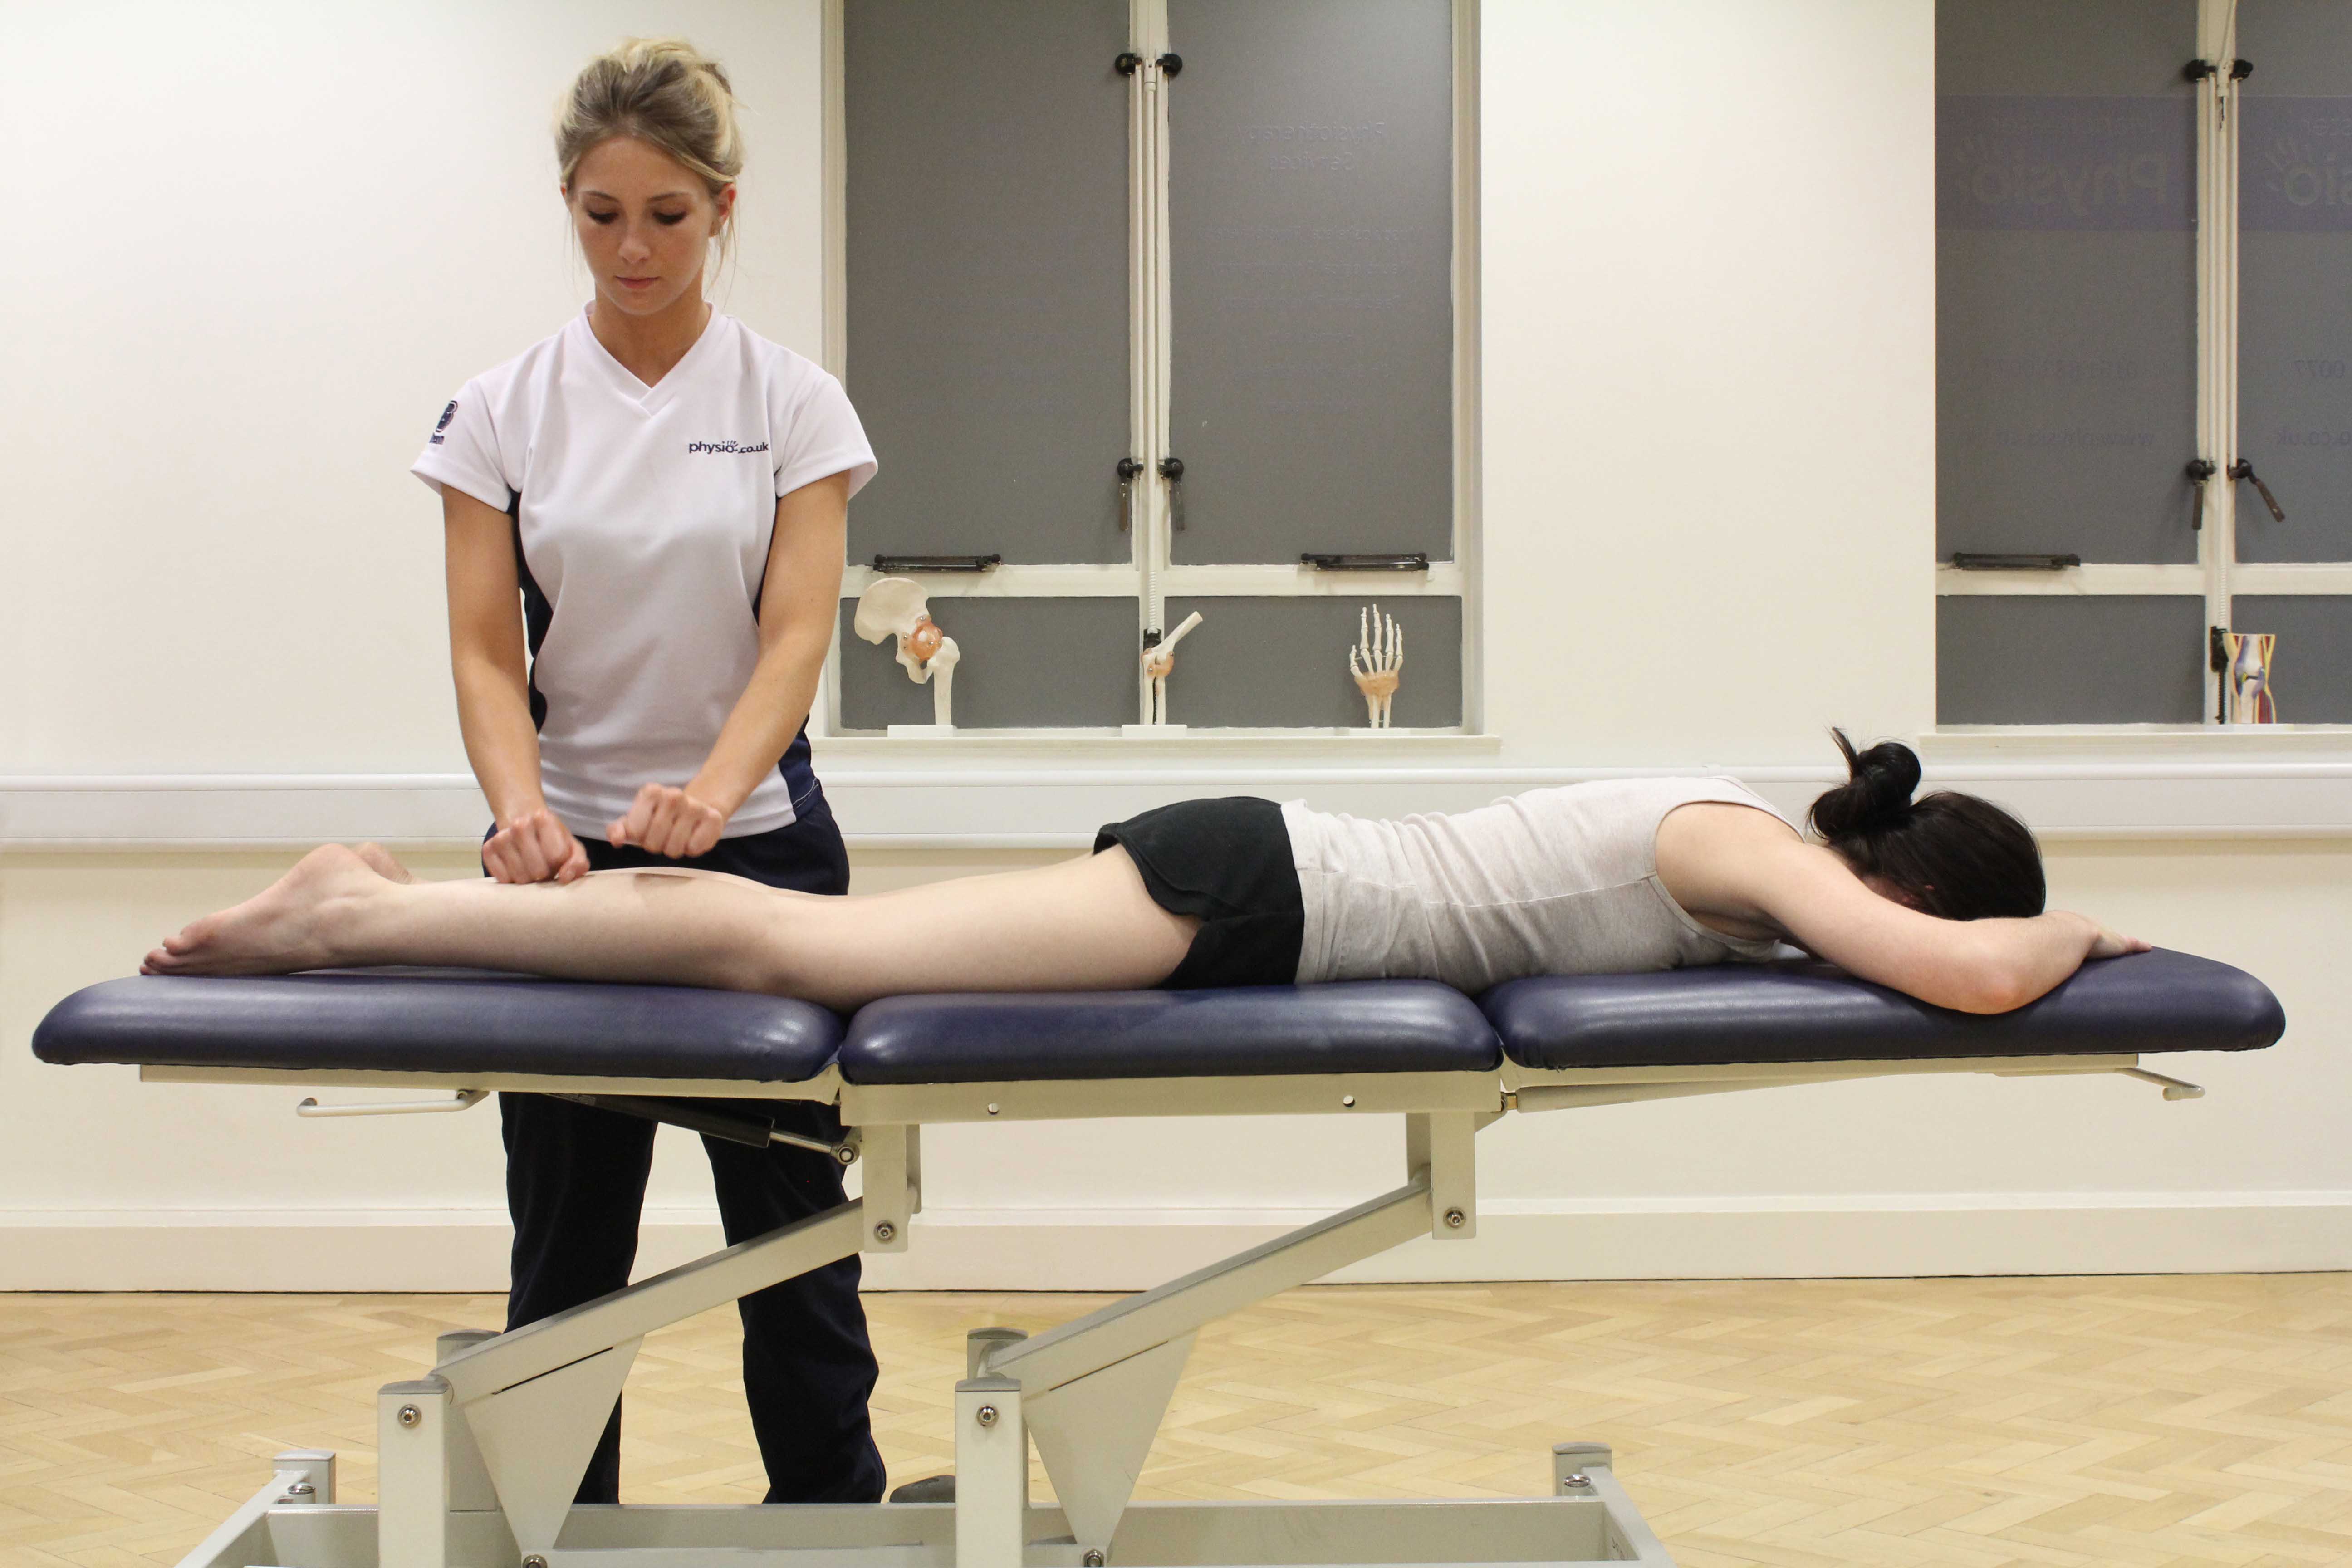 Beating percussion massage applied to the gastrocnemius muscle by experienced therapist